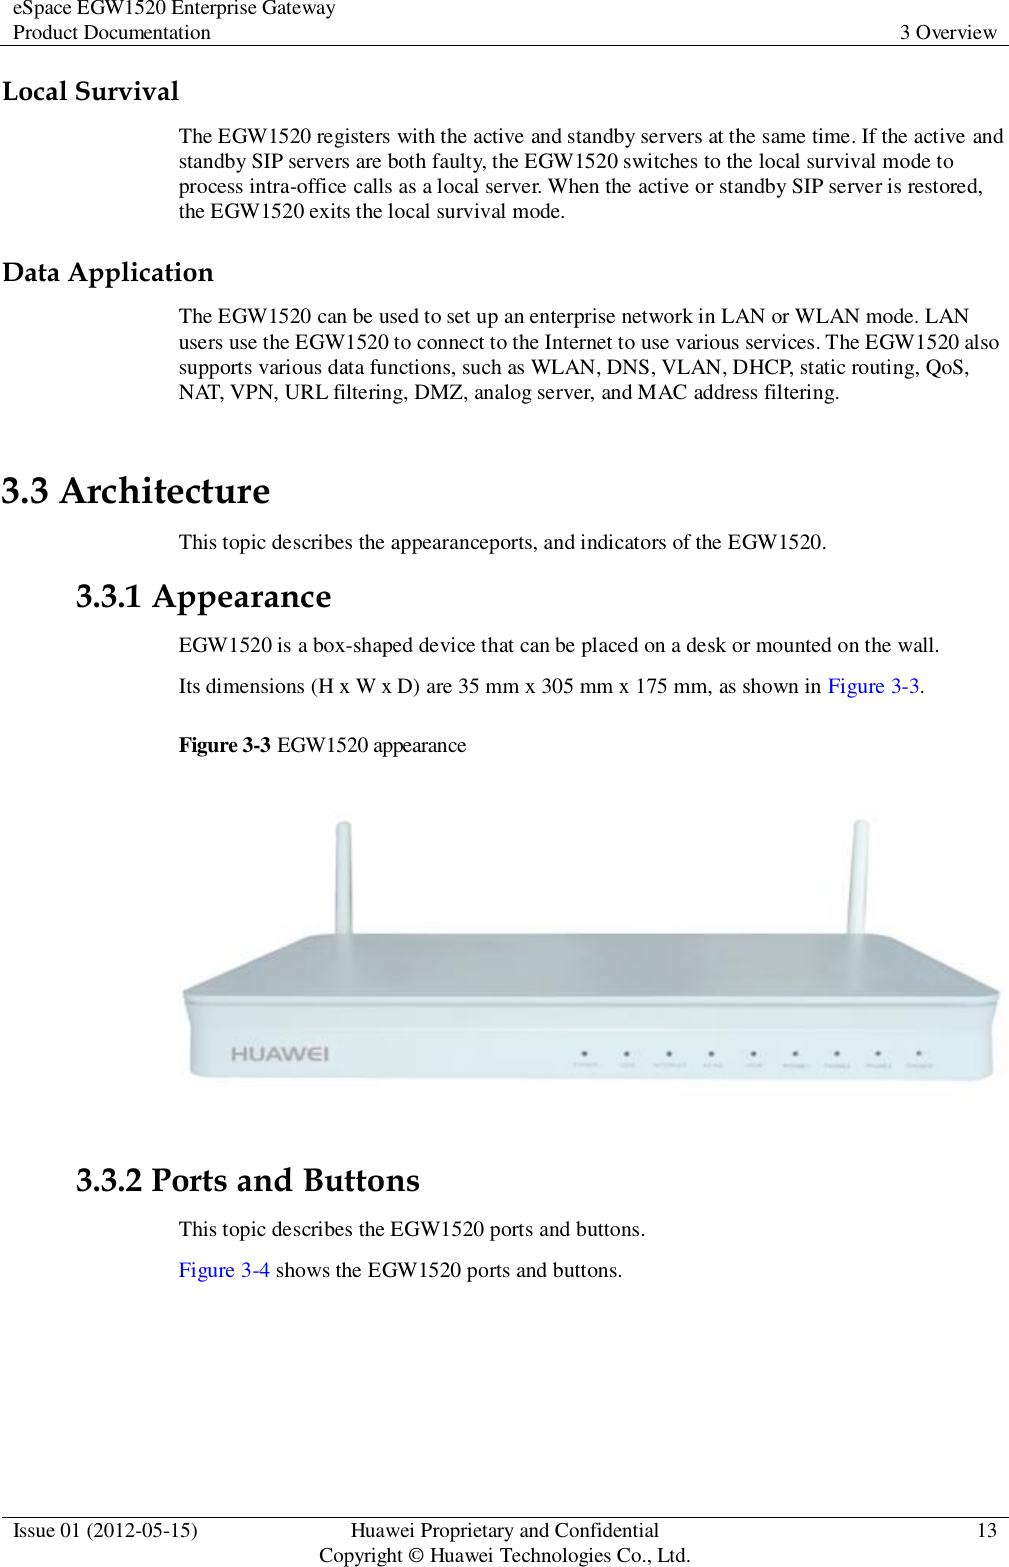 eSpace EGW1520 Enterprise Gateway Product Documentation 3 Overview  Issue 01 (2012-05-15) Huawei Proprietary and Confidential                                     Copyright © Huawei Technologies Co., Ltd. 13  Local Survival The EGW1520 registers with the active and standby servers at the same time. If the active and standby SIP servers are both faulty, the EGW1520 switches to the local survival mode to process intra-office calls as a local server. When the active or standby SIP server is restored, the EGW1520 exits the local survival mode. Data Application The EGW1520 can be used to set up an enterprise network in LAN or WLAN mode. LAN users use the EGW1520 to connect to the Internet to use various services. The EGW1520 also supports various data functions, such as WLAN, DNS, VLAN, DHCP, static routing, QoS, NAT, VPN, URL filtering, DMZ, analog server, and MAC address filtering. 3.3 Architecture This topic describes the appearanceports, and indicators of the EGW1520. 3.3.1 Appearance EGW1520 is a box-shaped device that can be placed on a desk or mounted on the wall. Its dimensions (H x W x D) are 35 mm x 305 mm x 175 mm, as shown in Figure 3-3. Figure 3-3 EGW1520 appearance   3.3.2 Ports and Buttons This topic describes the EGW1520 ports and buttons. Figure 3-4 shows the EGW1520 ports and buttons. 